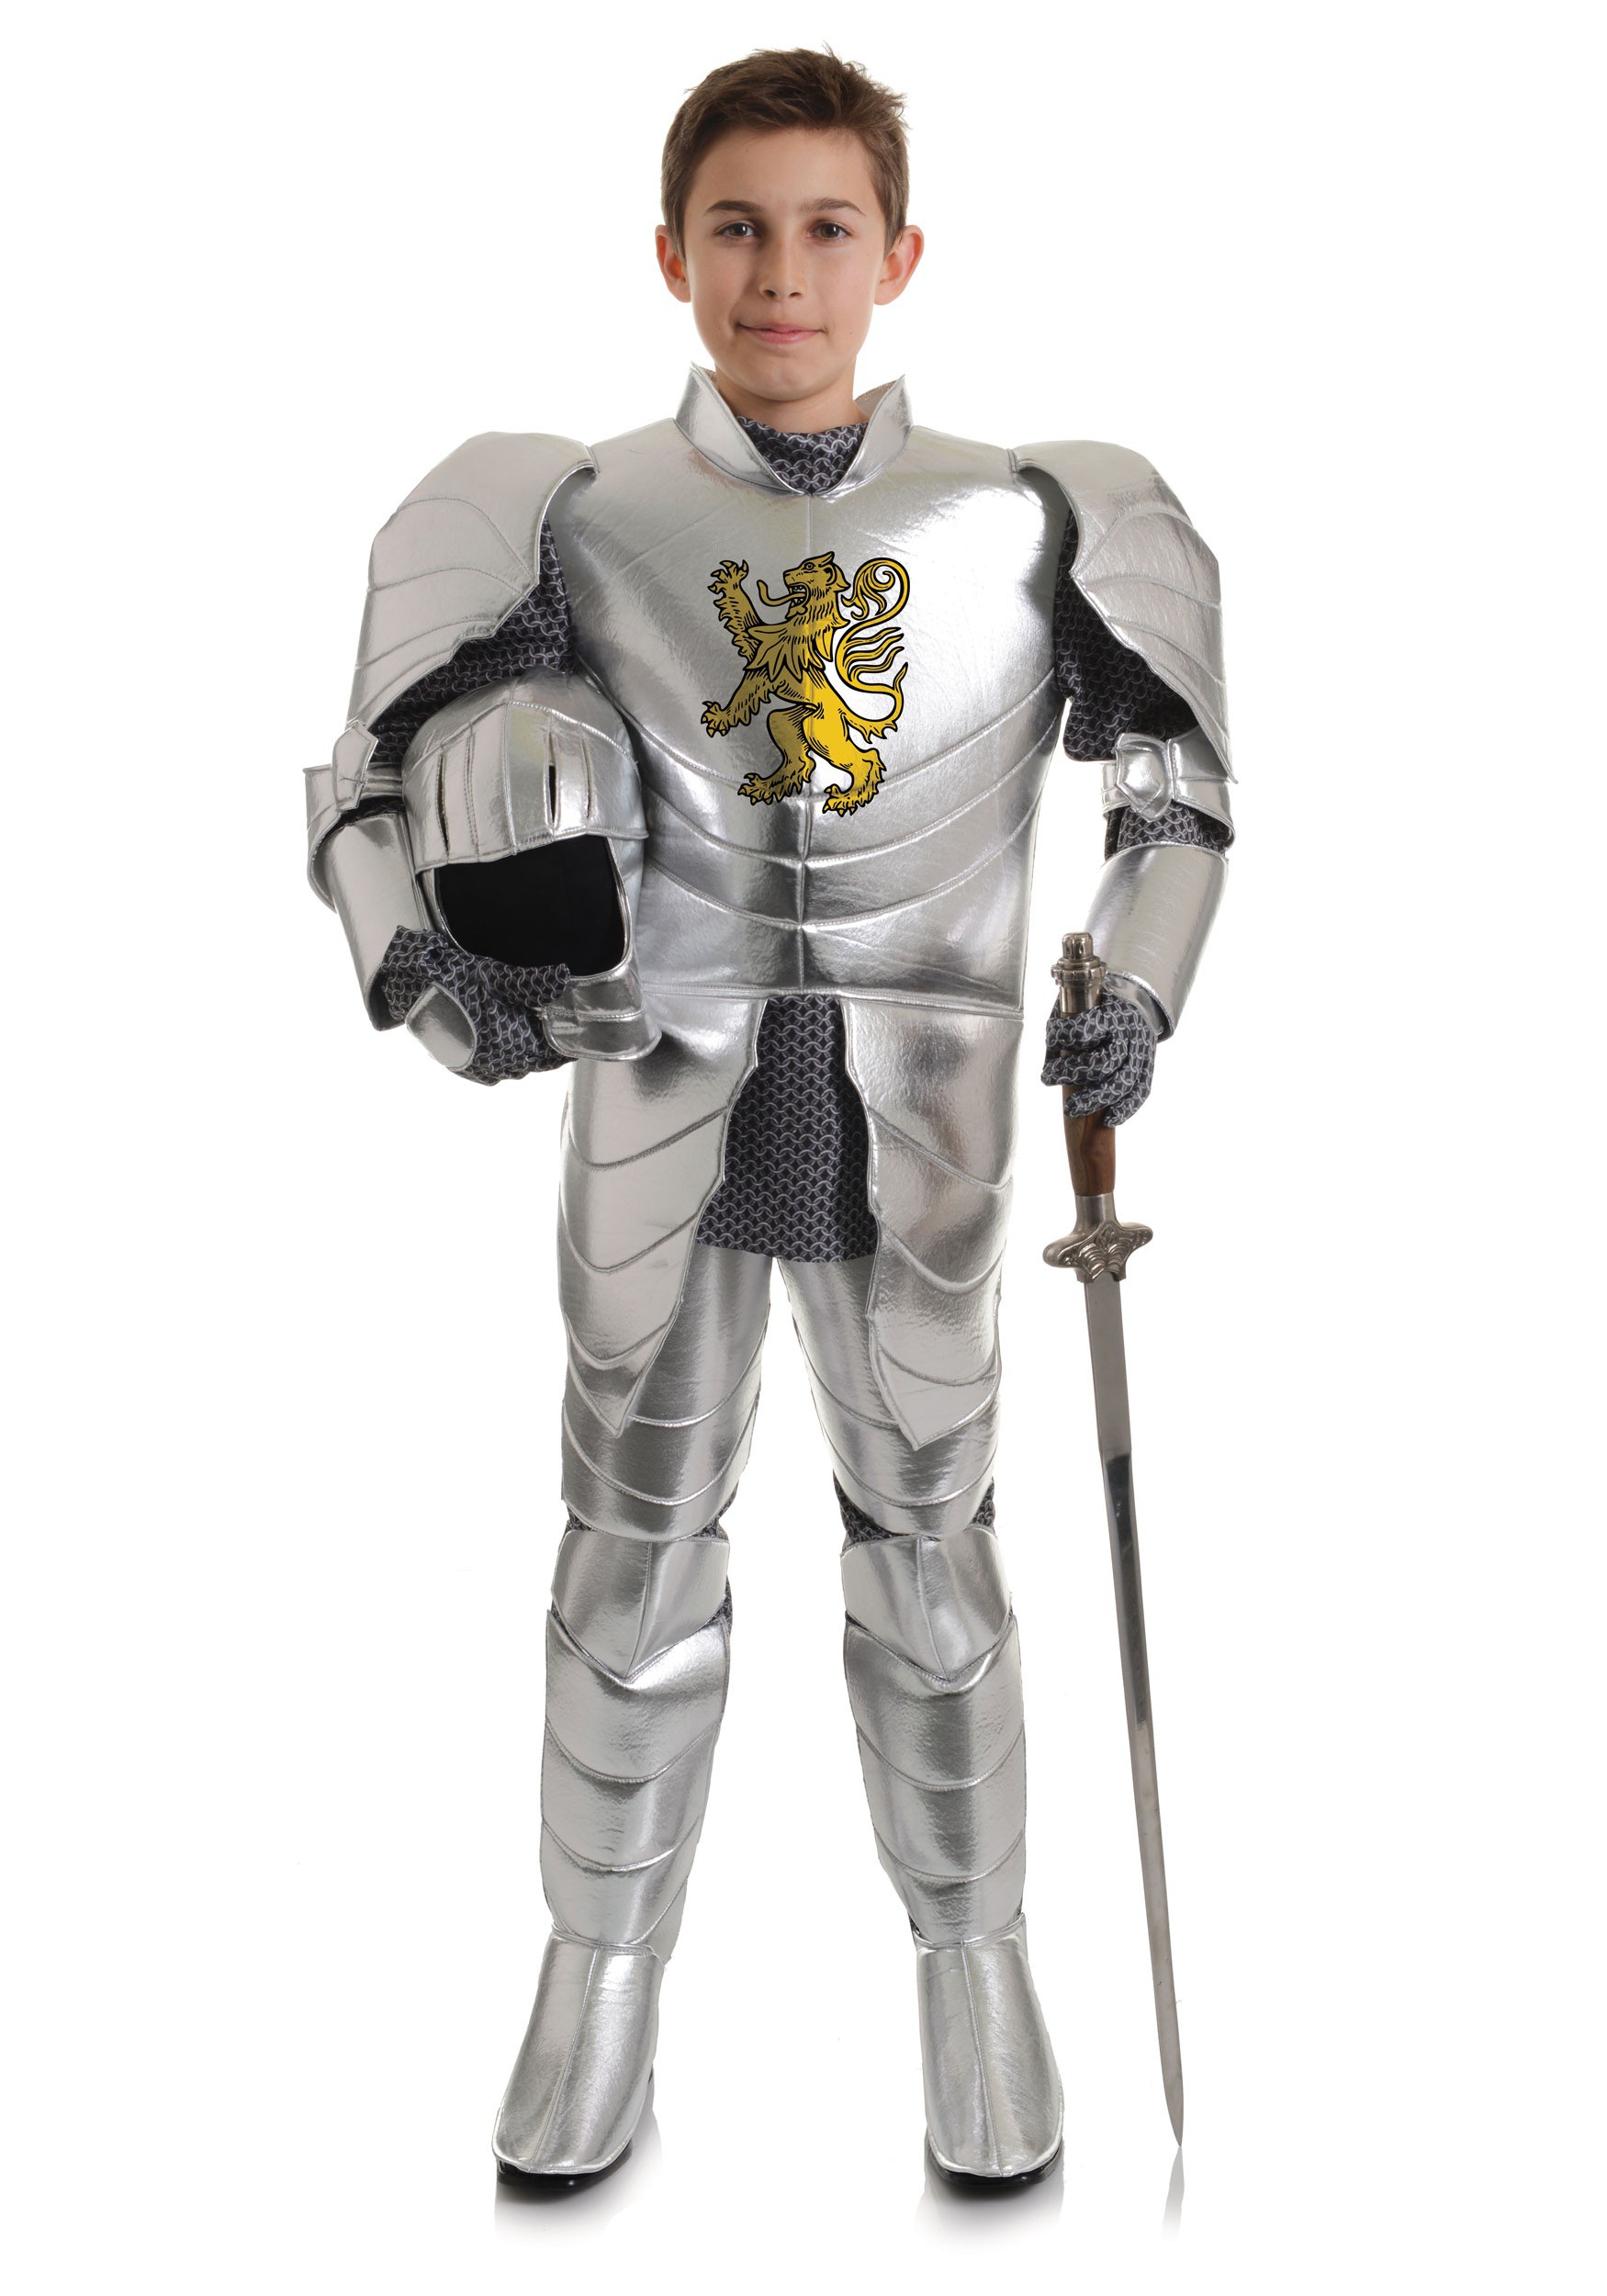 kids chainmail kids knight armor knight dress up Clothing Boys Clothing Costumes quality dress up costumes warrior costume kids knight costume kids medieval costume 